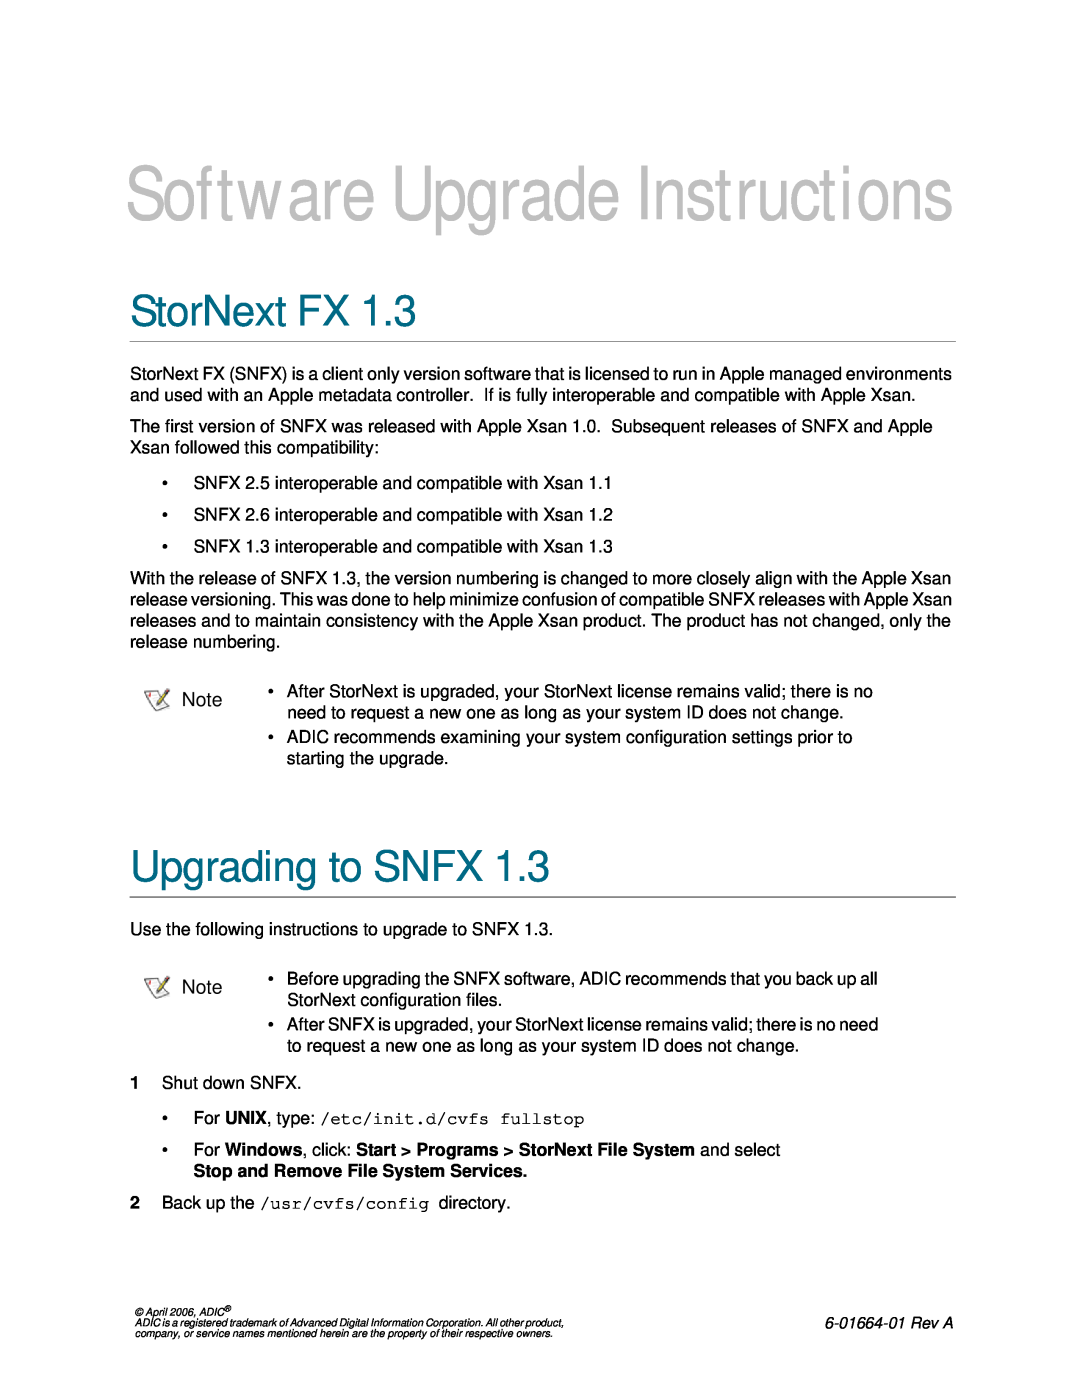 ADIC 1.3 manual StorNext FX, Upgrading to SNFX, Stop and Remove File System Services, Software Upgrade Instructions 